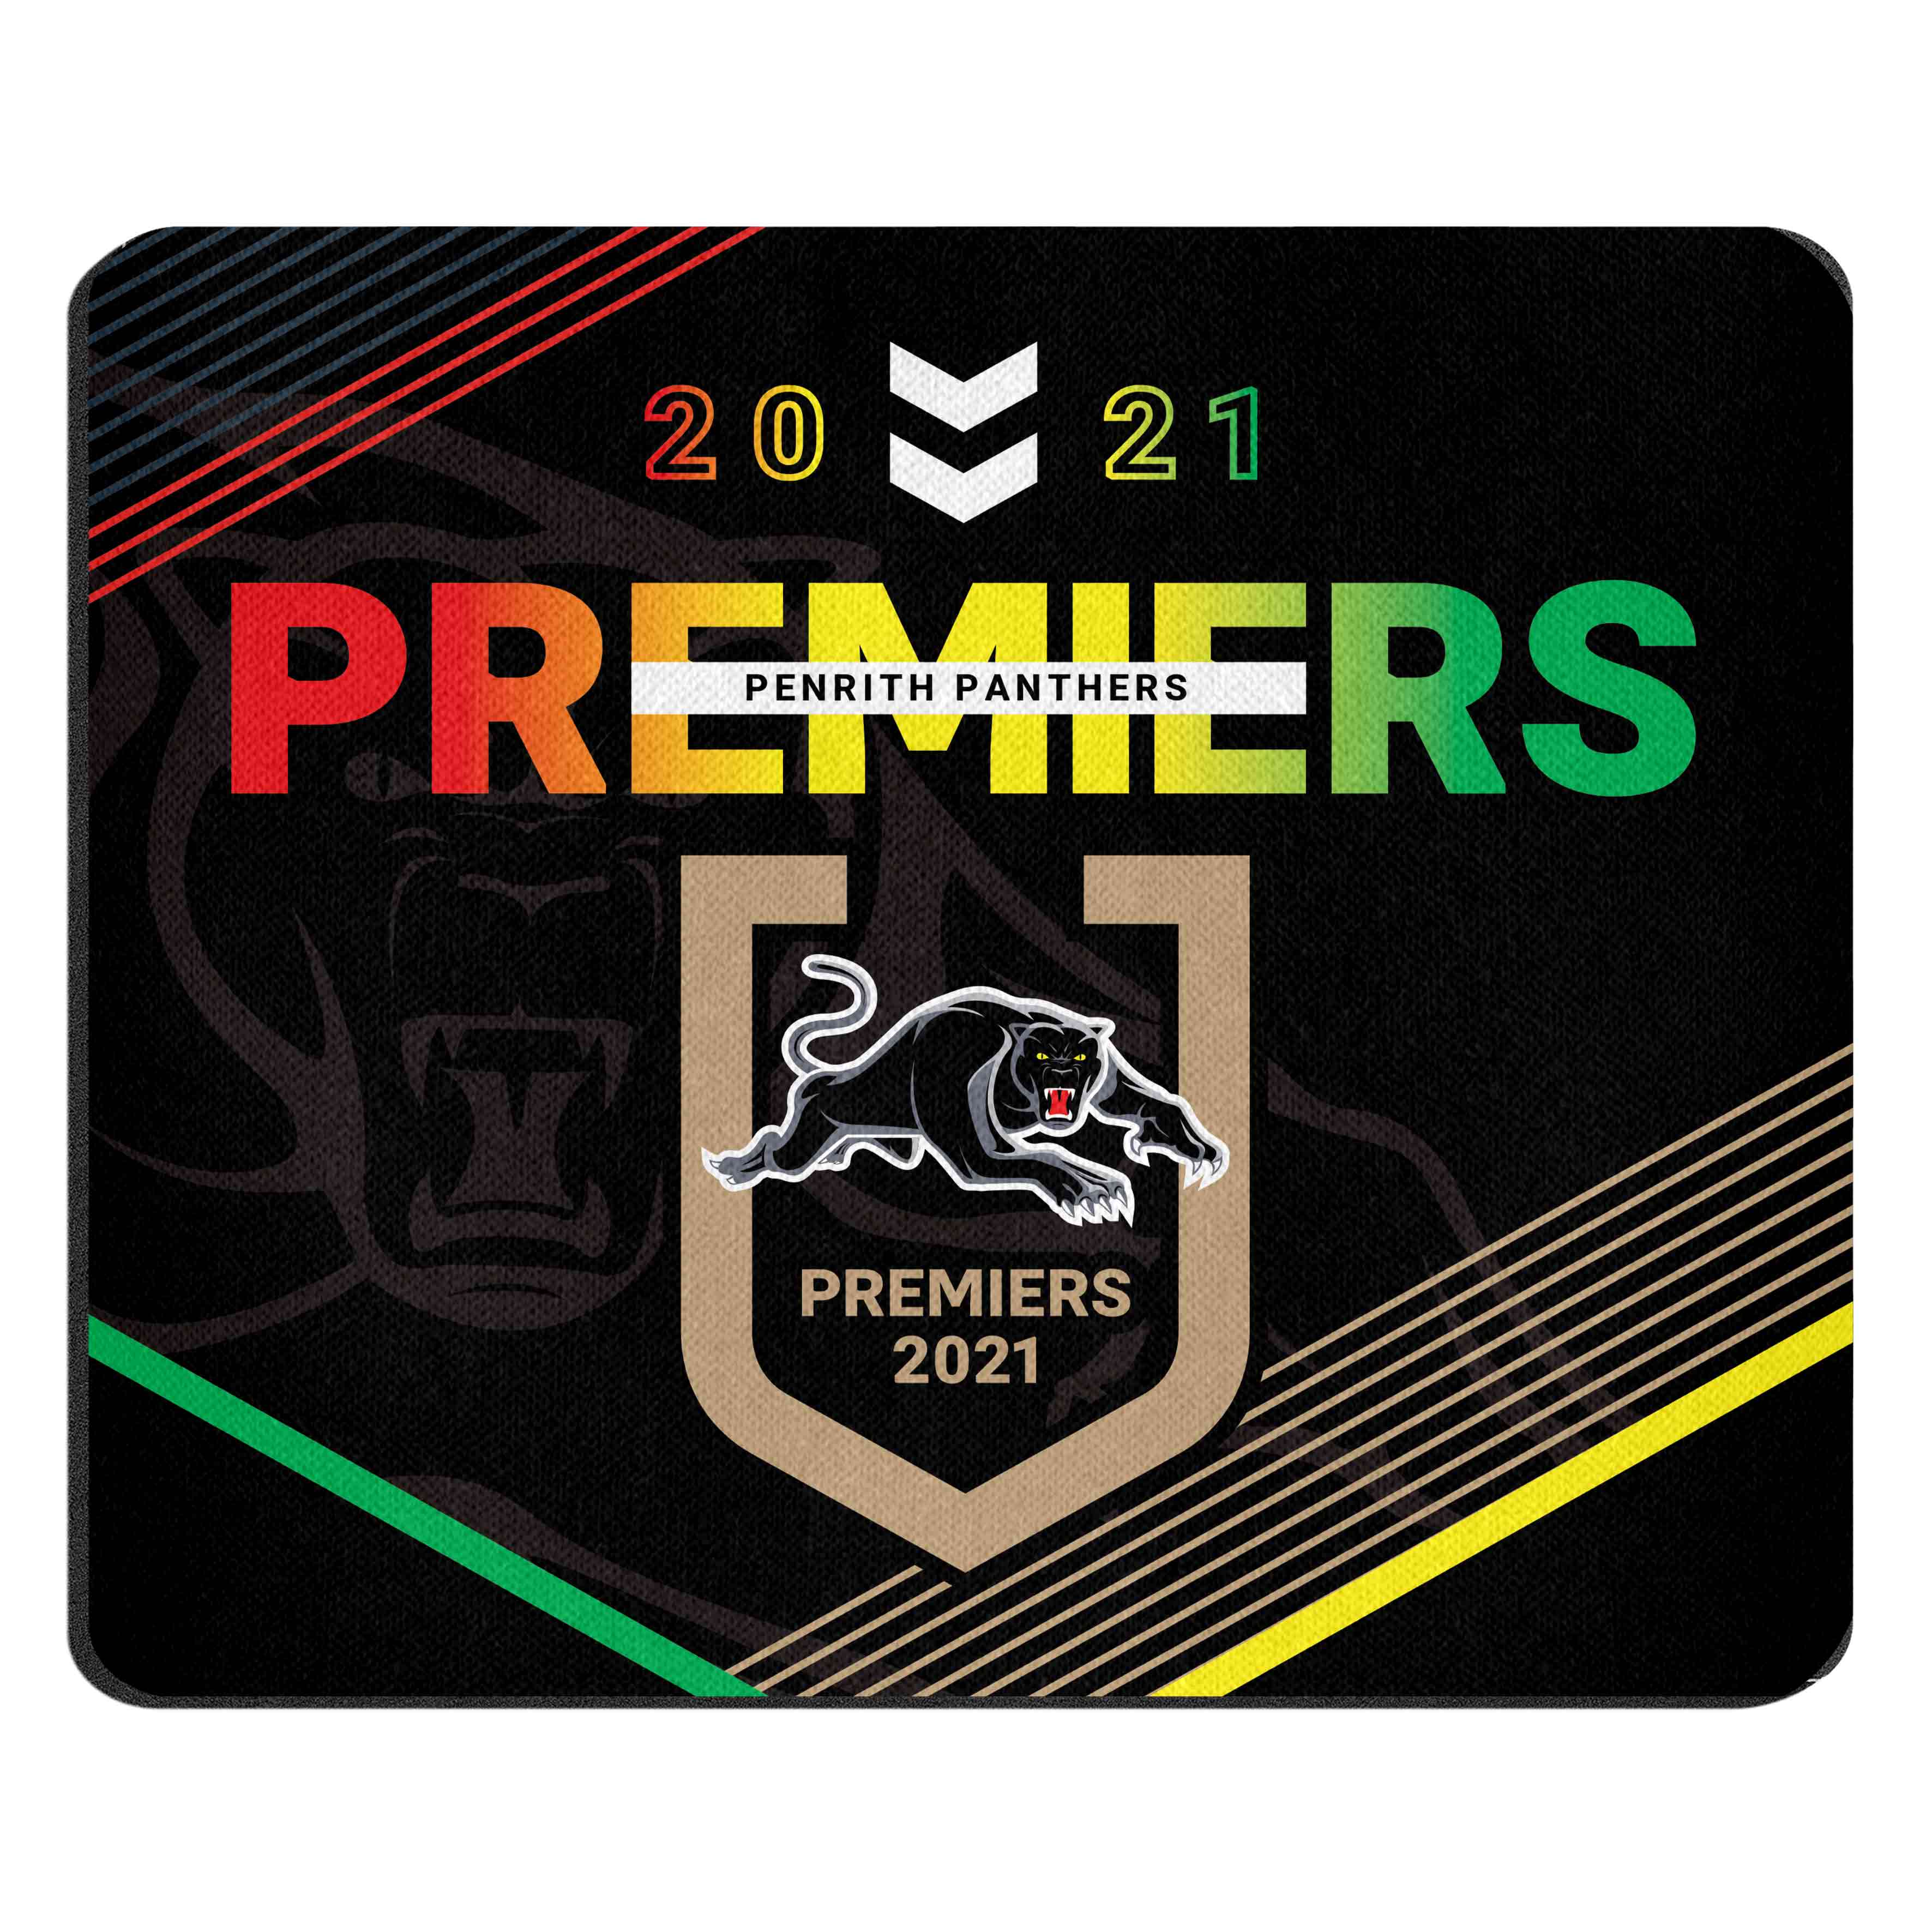 Penrith Panthers 2021 NRL Premiers Computer Mouse Mat Pad